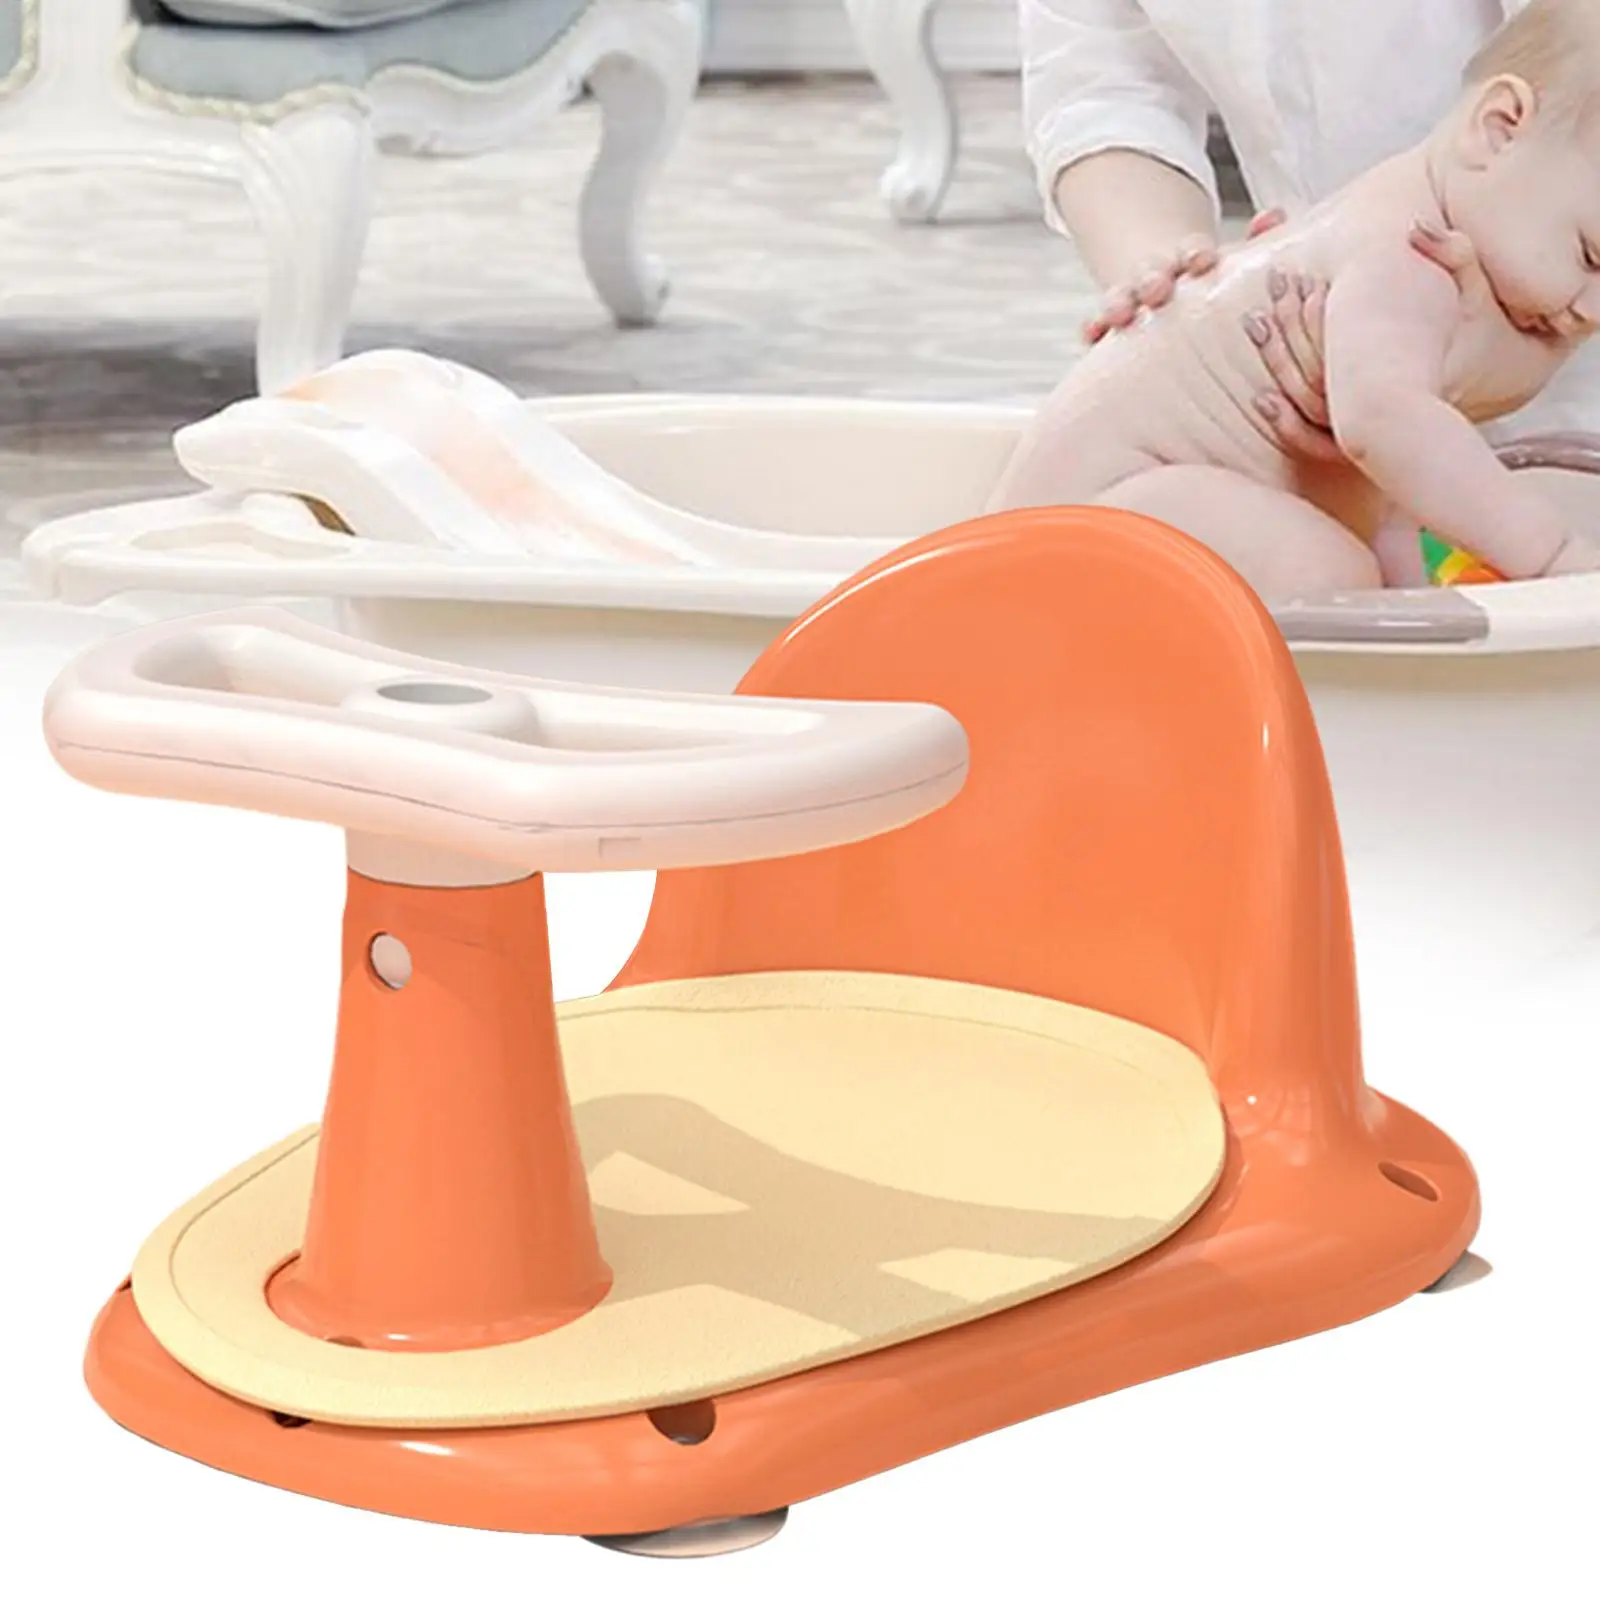 Cute Infant Bath Tub Seat Tub Sitting up with Anti Slip Mat Suction Bath Seat Support Steering Wheel Design for Baby Newborn